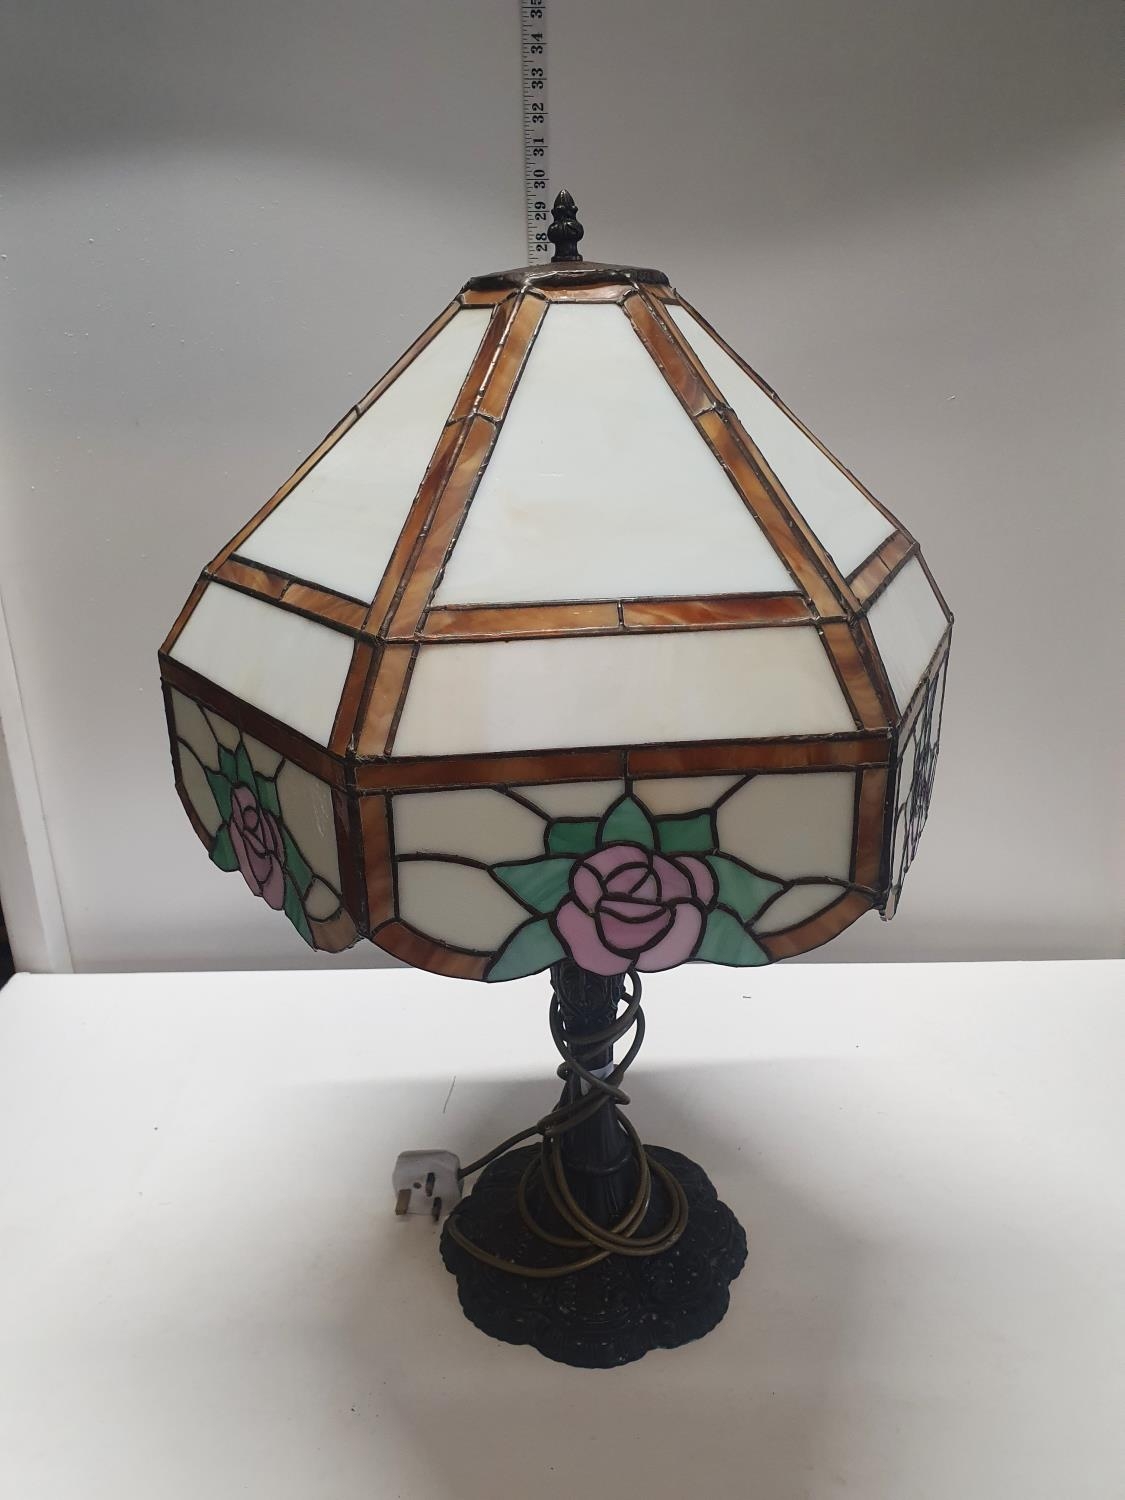 A bespoke Tiffany style lamp h70cm, shipping unavailable